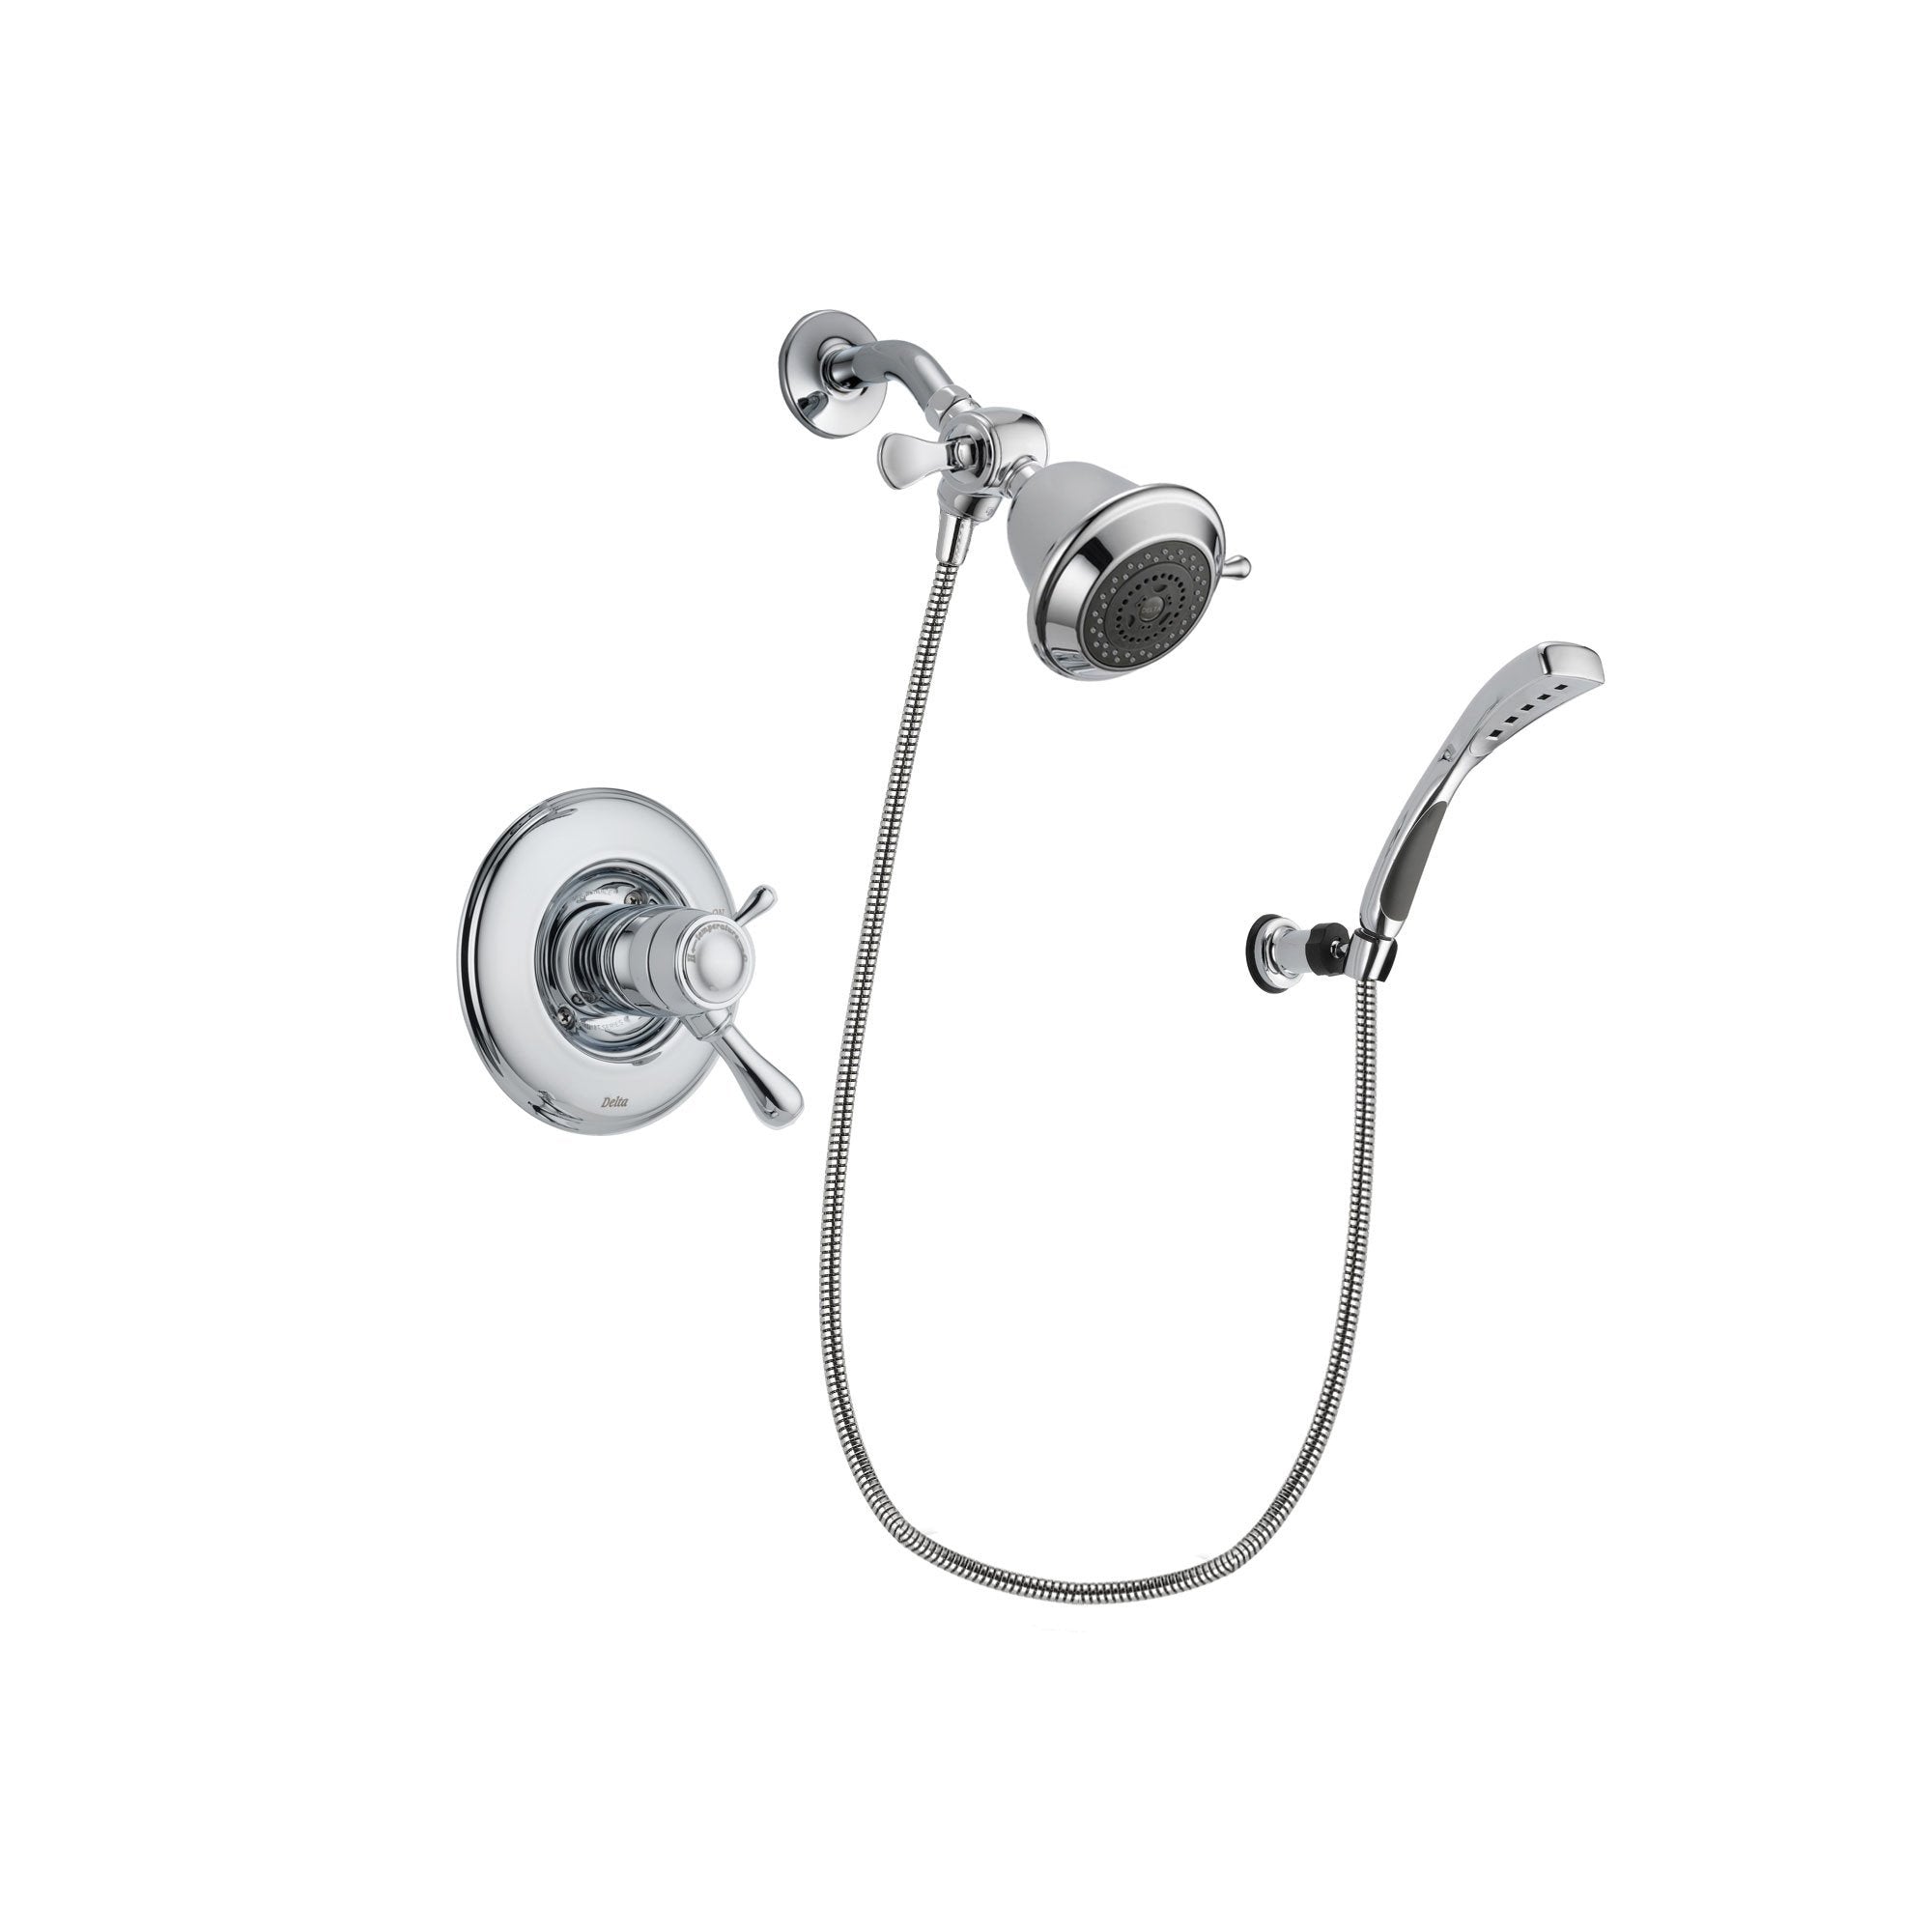 Delta Leland Chrome Finish Thermostatic Shower Faucet System Package with Shower Head and Wall-Mount Bracket with Handheld Shower Spray Includes Rough-in Valve DSP0974V